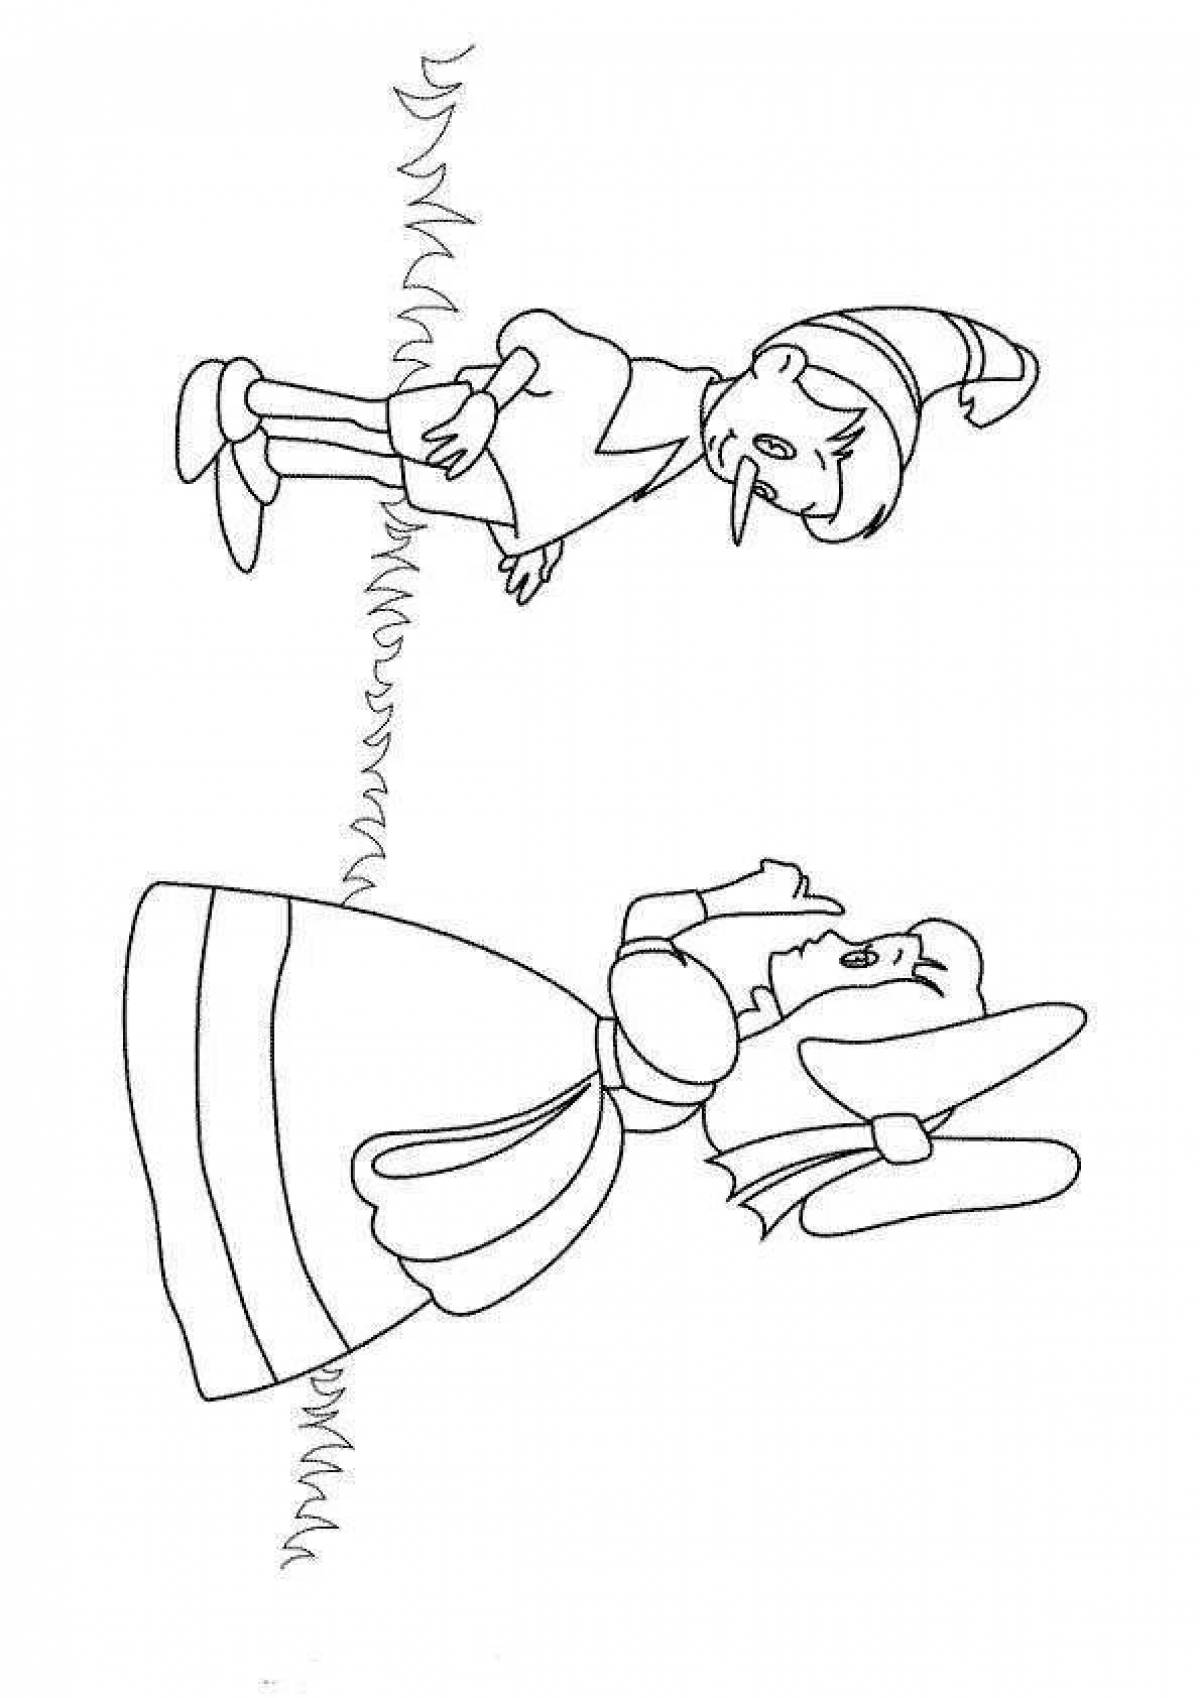 Animated drawing of pinocchio